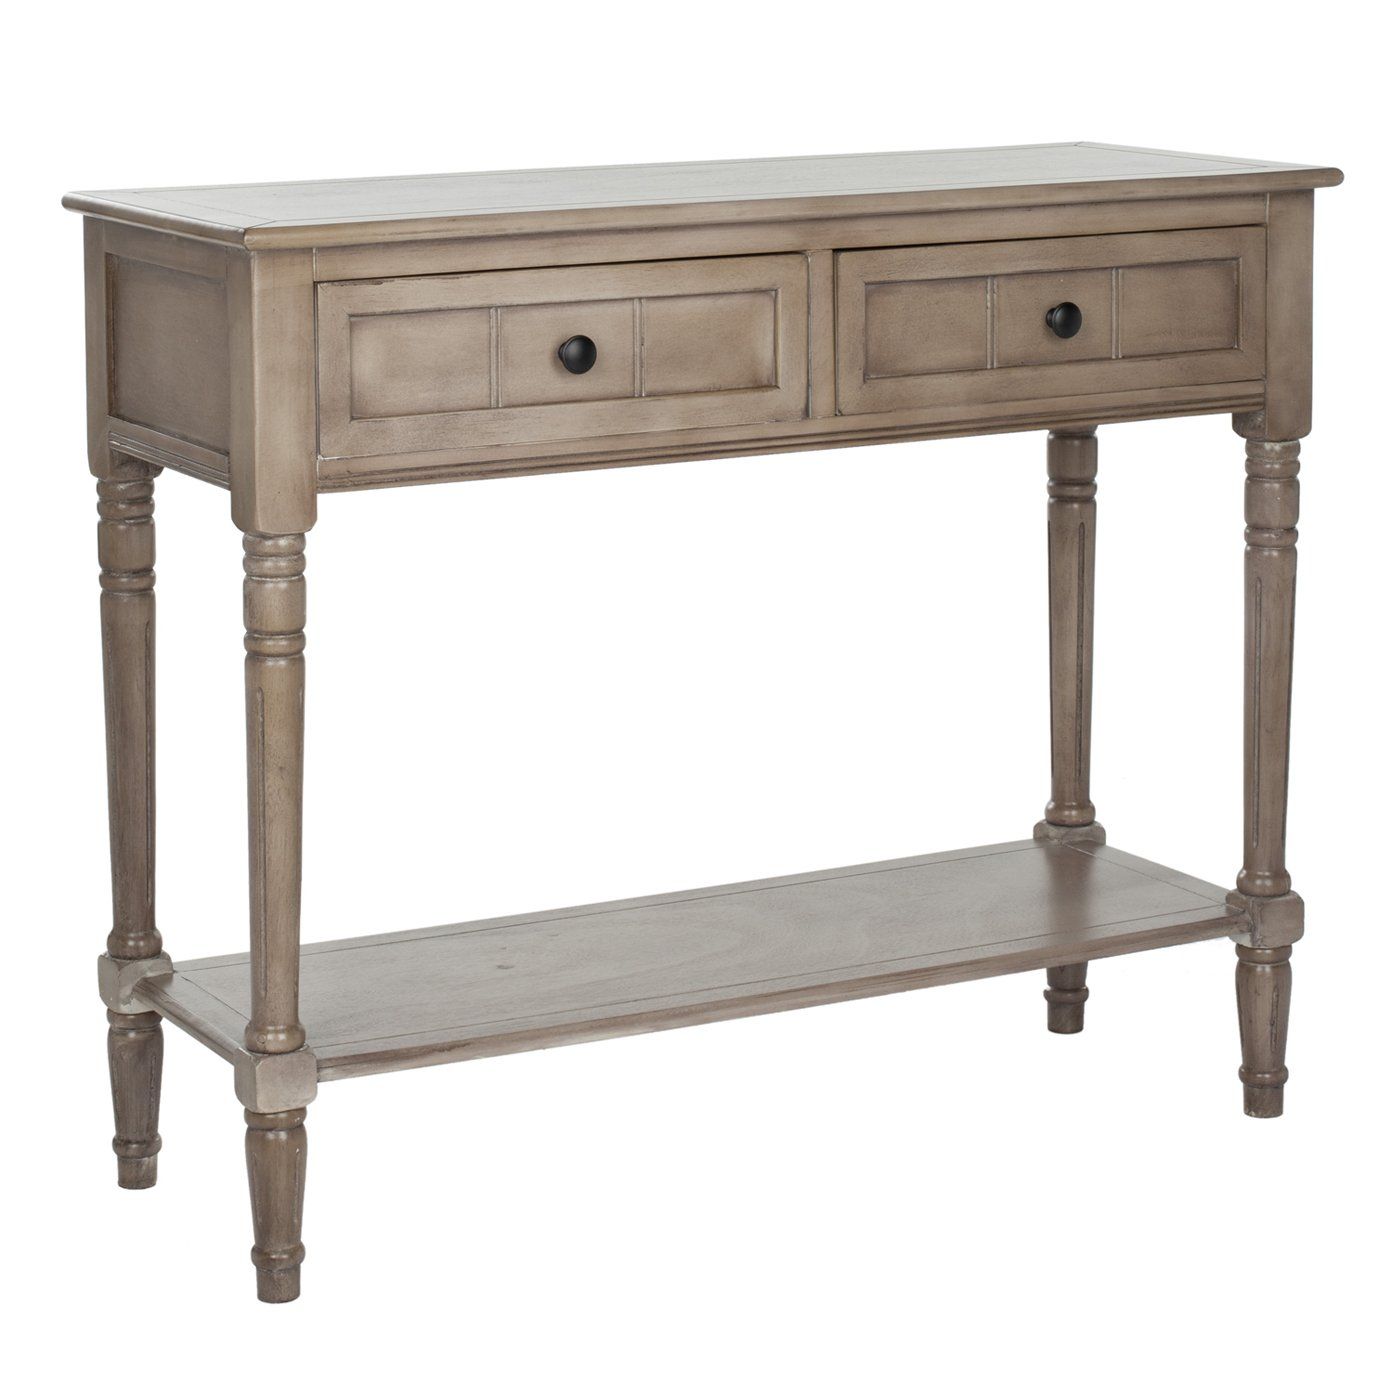 Entrance, Hallway And Console Tables | Lowe's Canada Inside Echelon Console Tables (View 11 of 30)